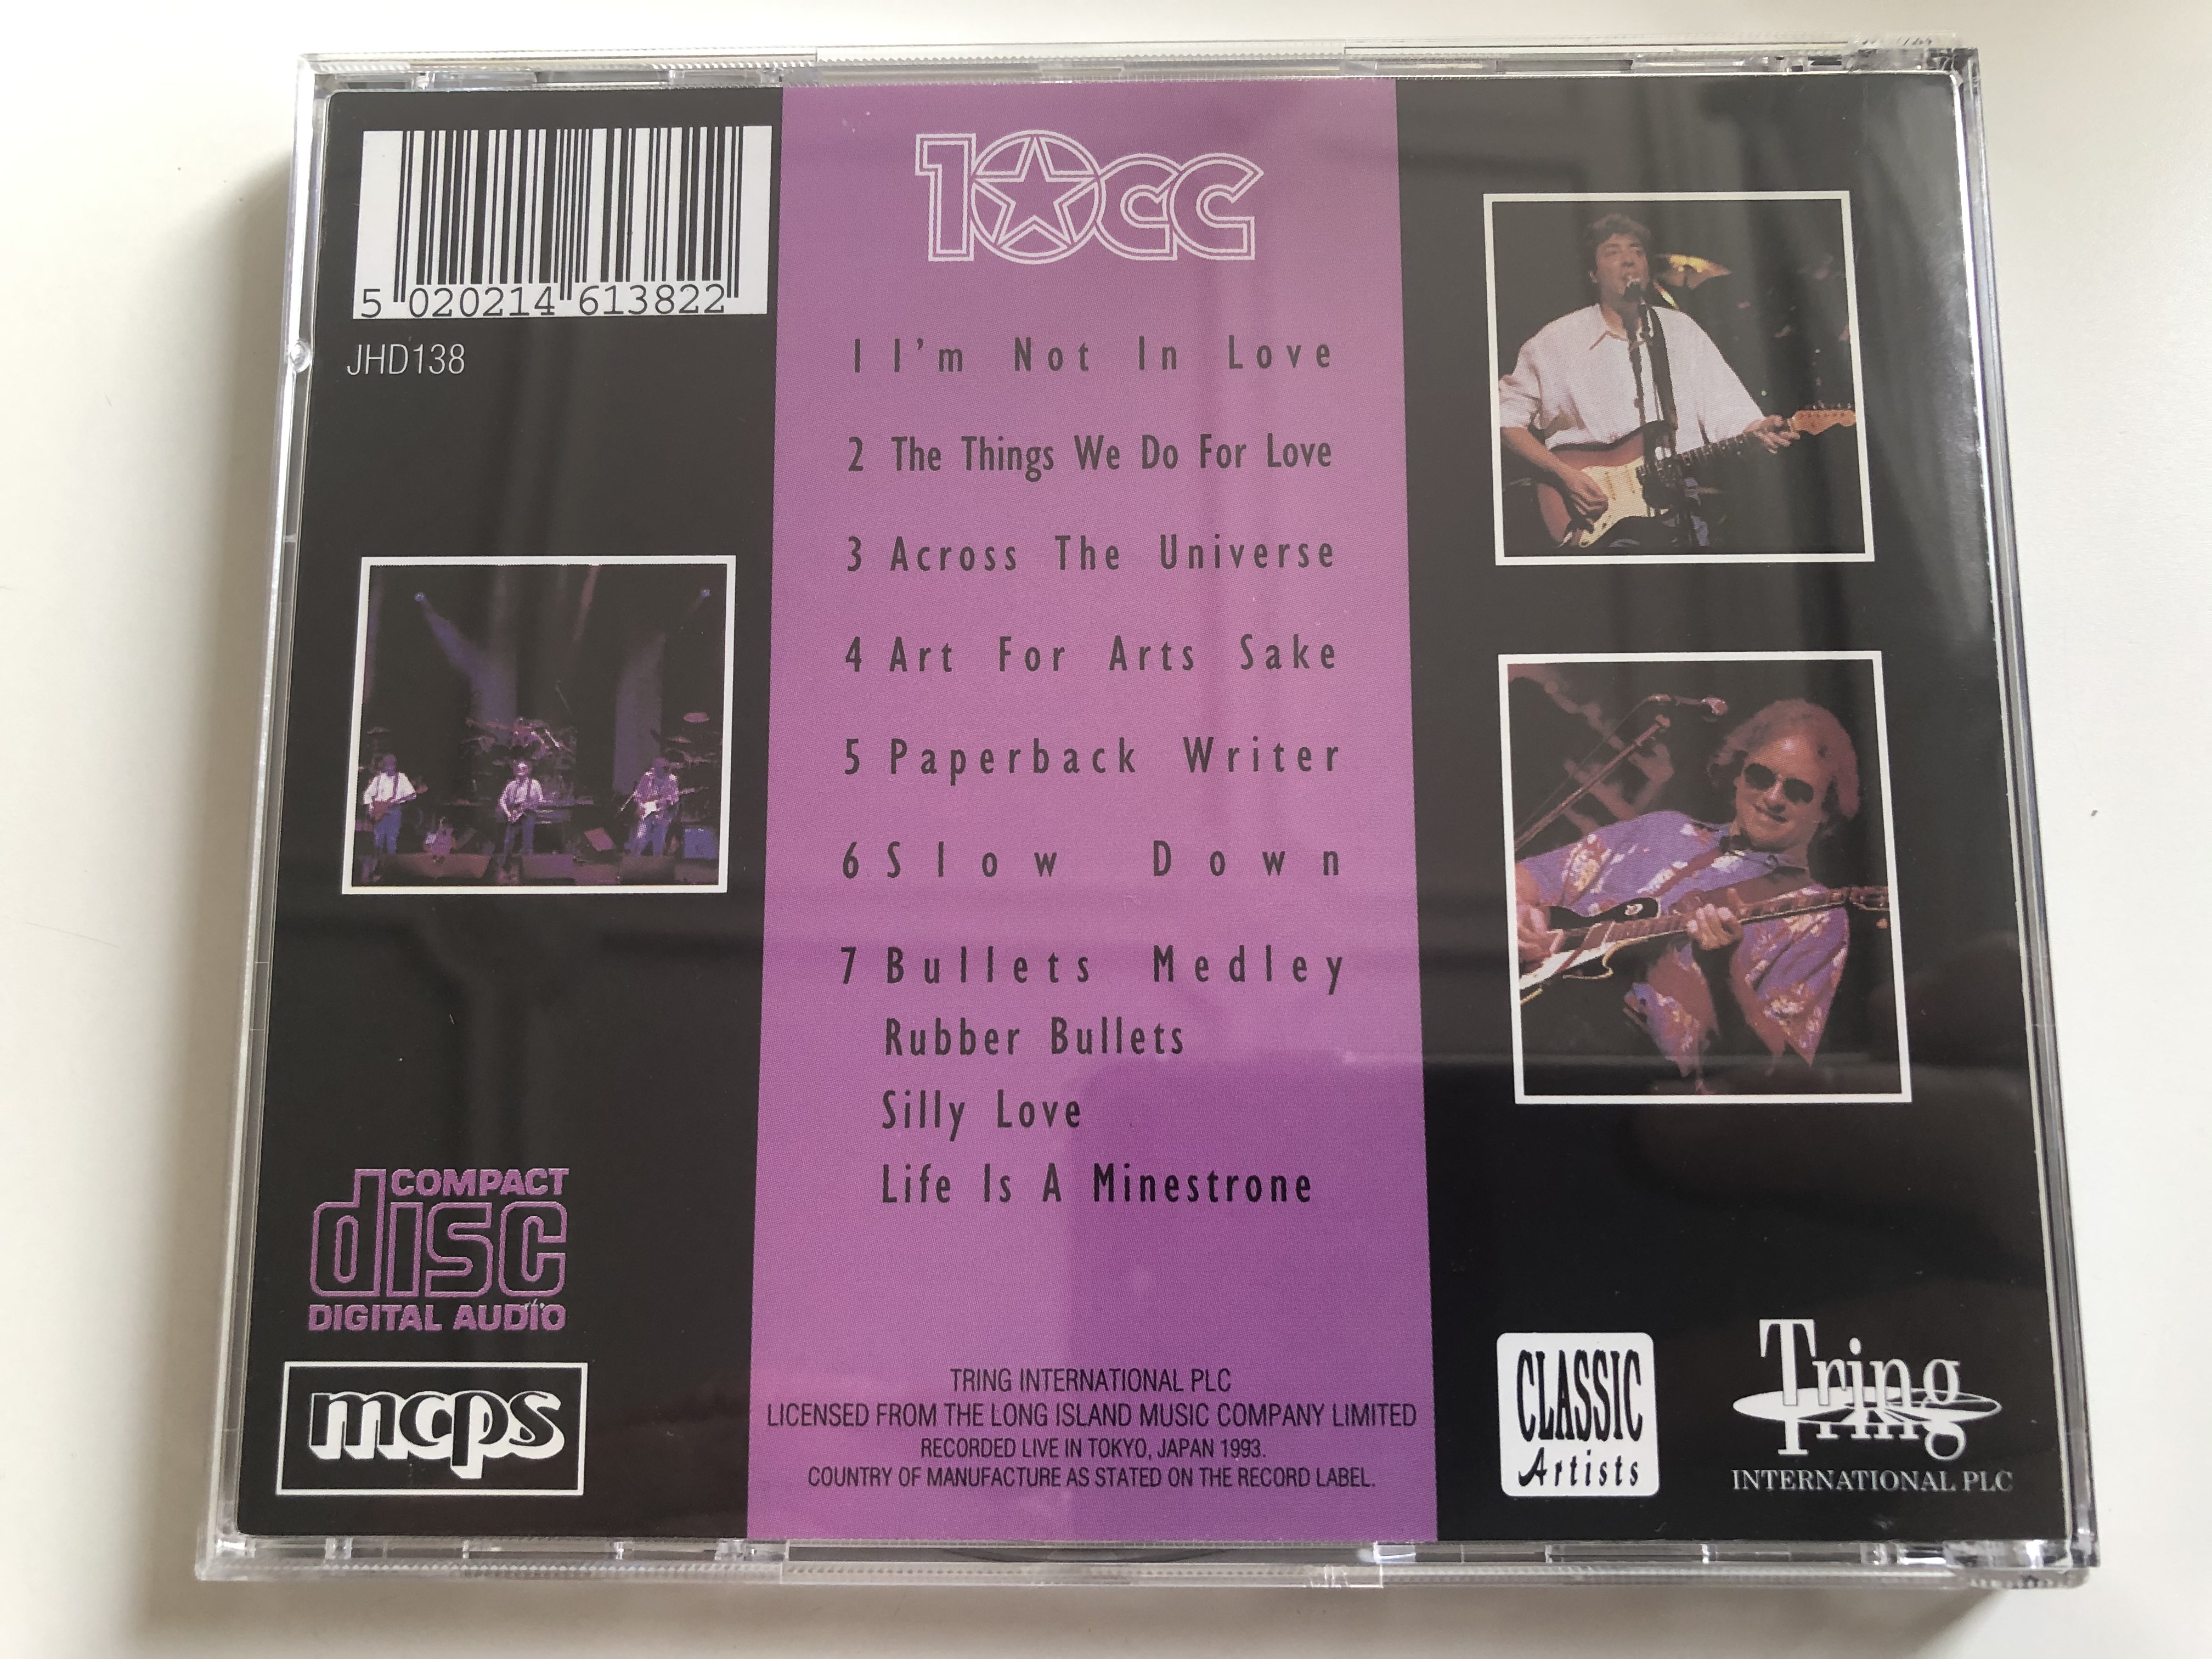 live-in-concert-volume-two-10cc-tring-audio-cd-1993-jhd138-4-.jpg